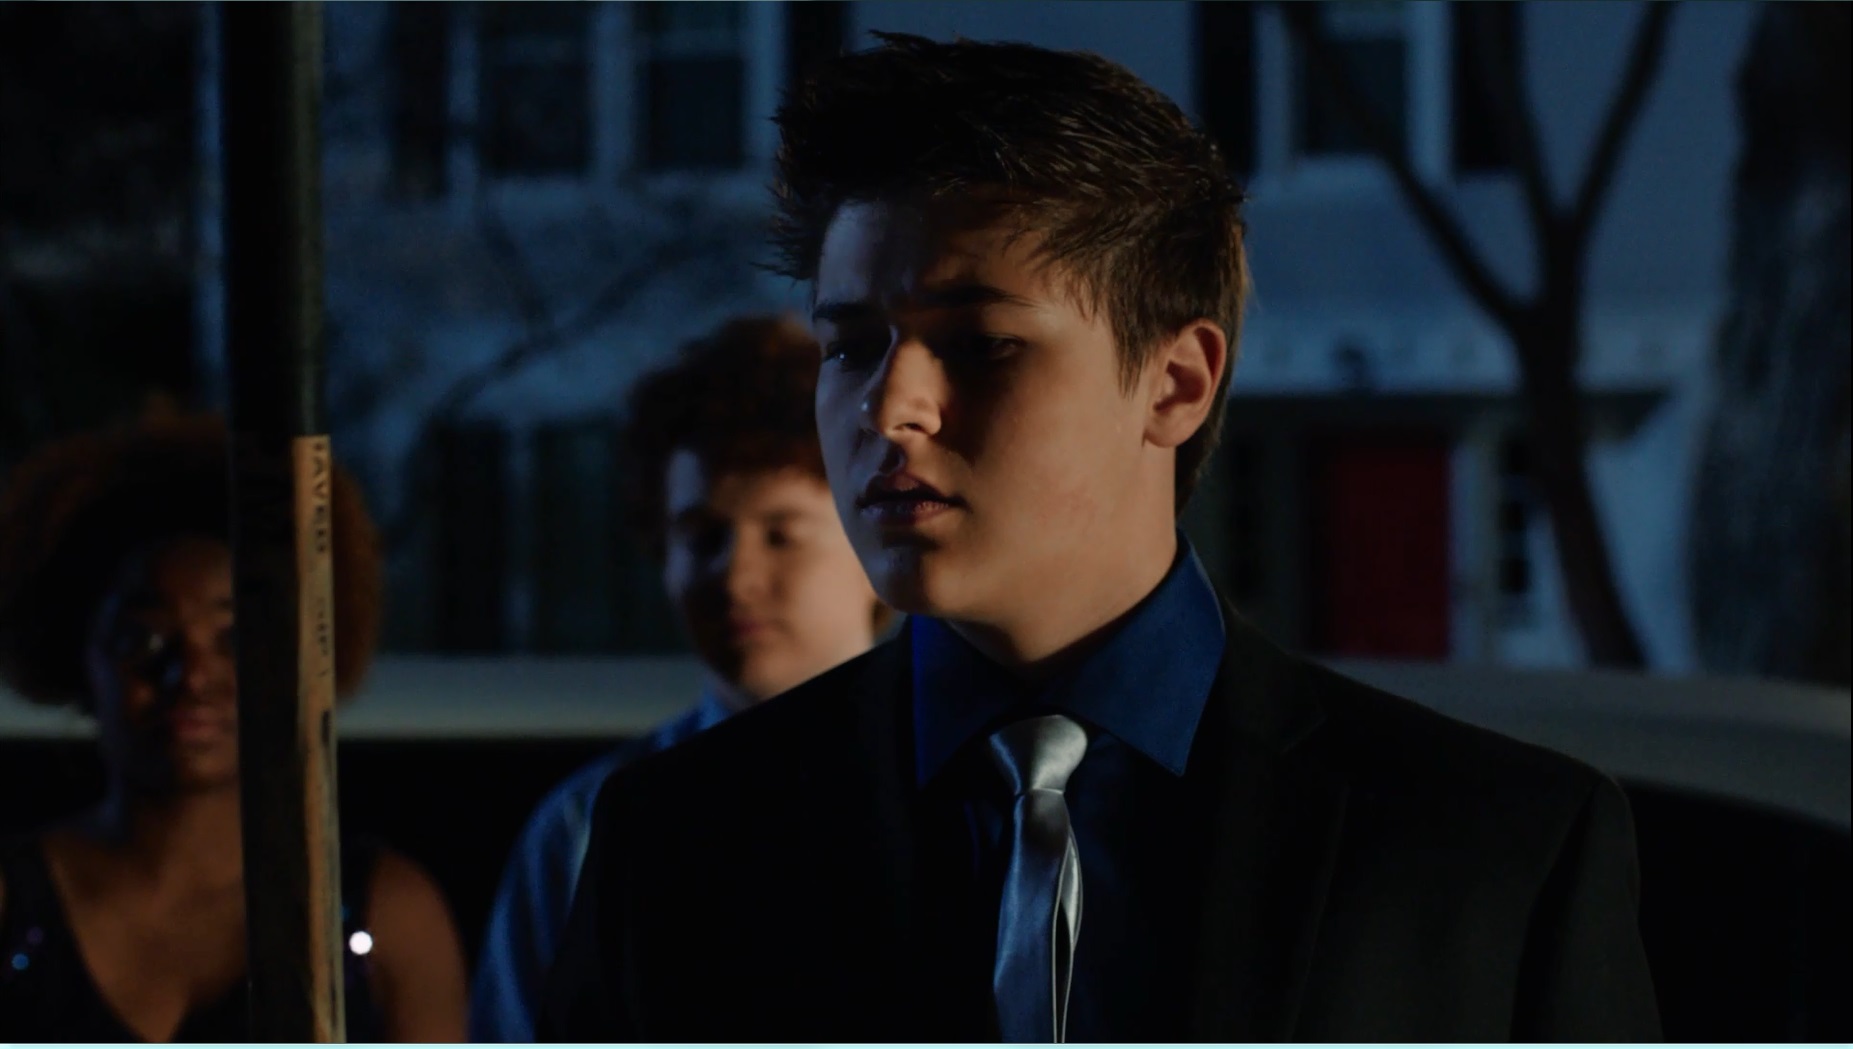 Jacob M Williams acting in a prom scene from the film 